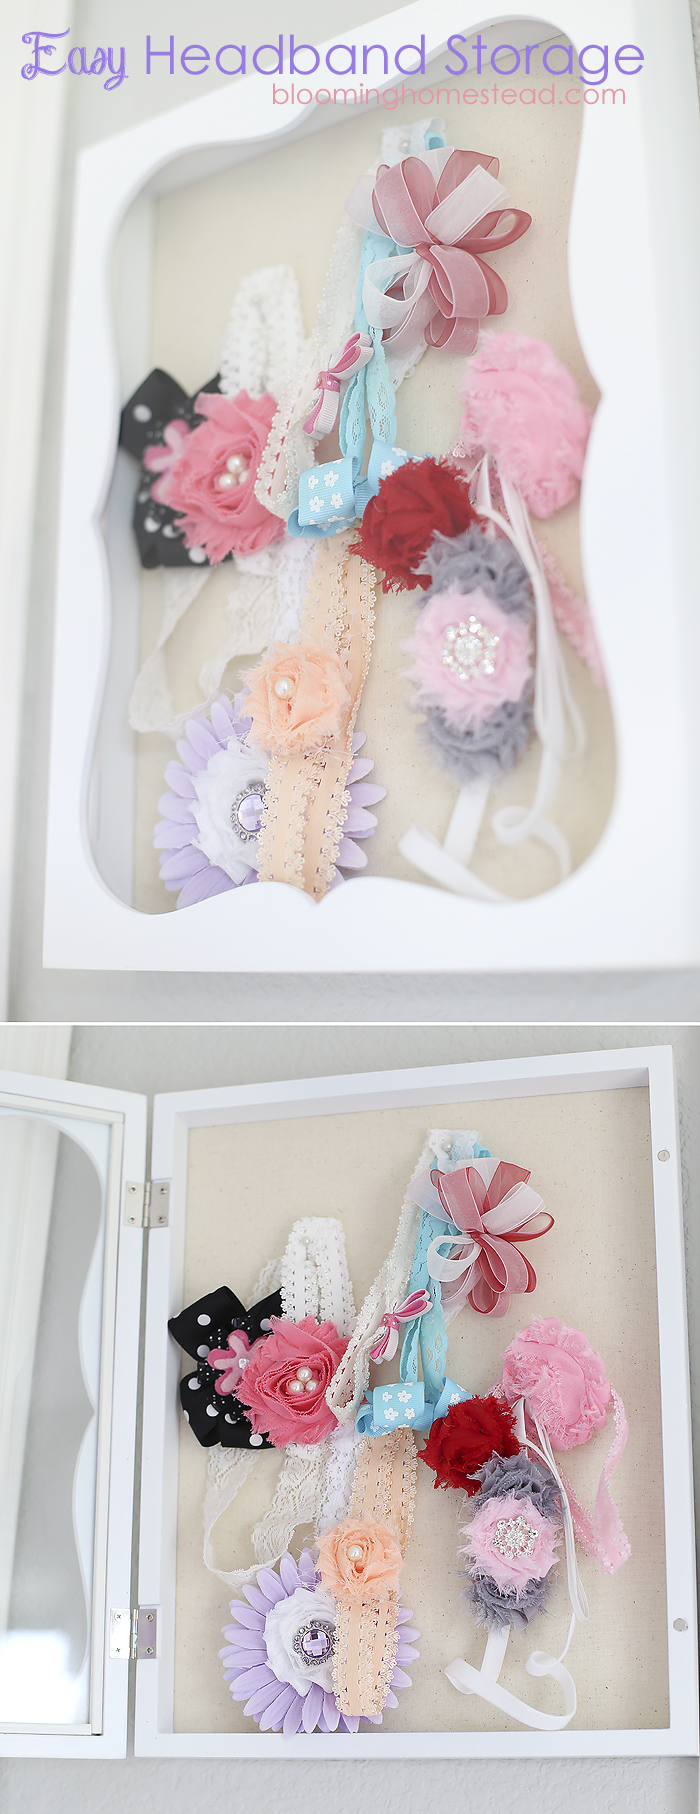 Quick and Easy Hairbow Storage - Life on the Bay Bush